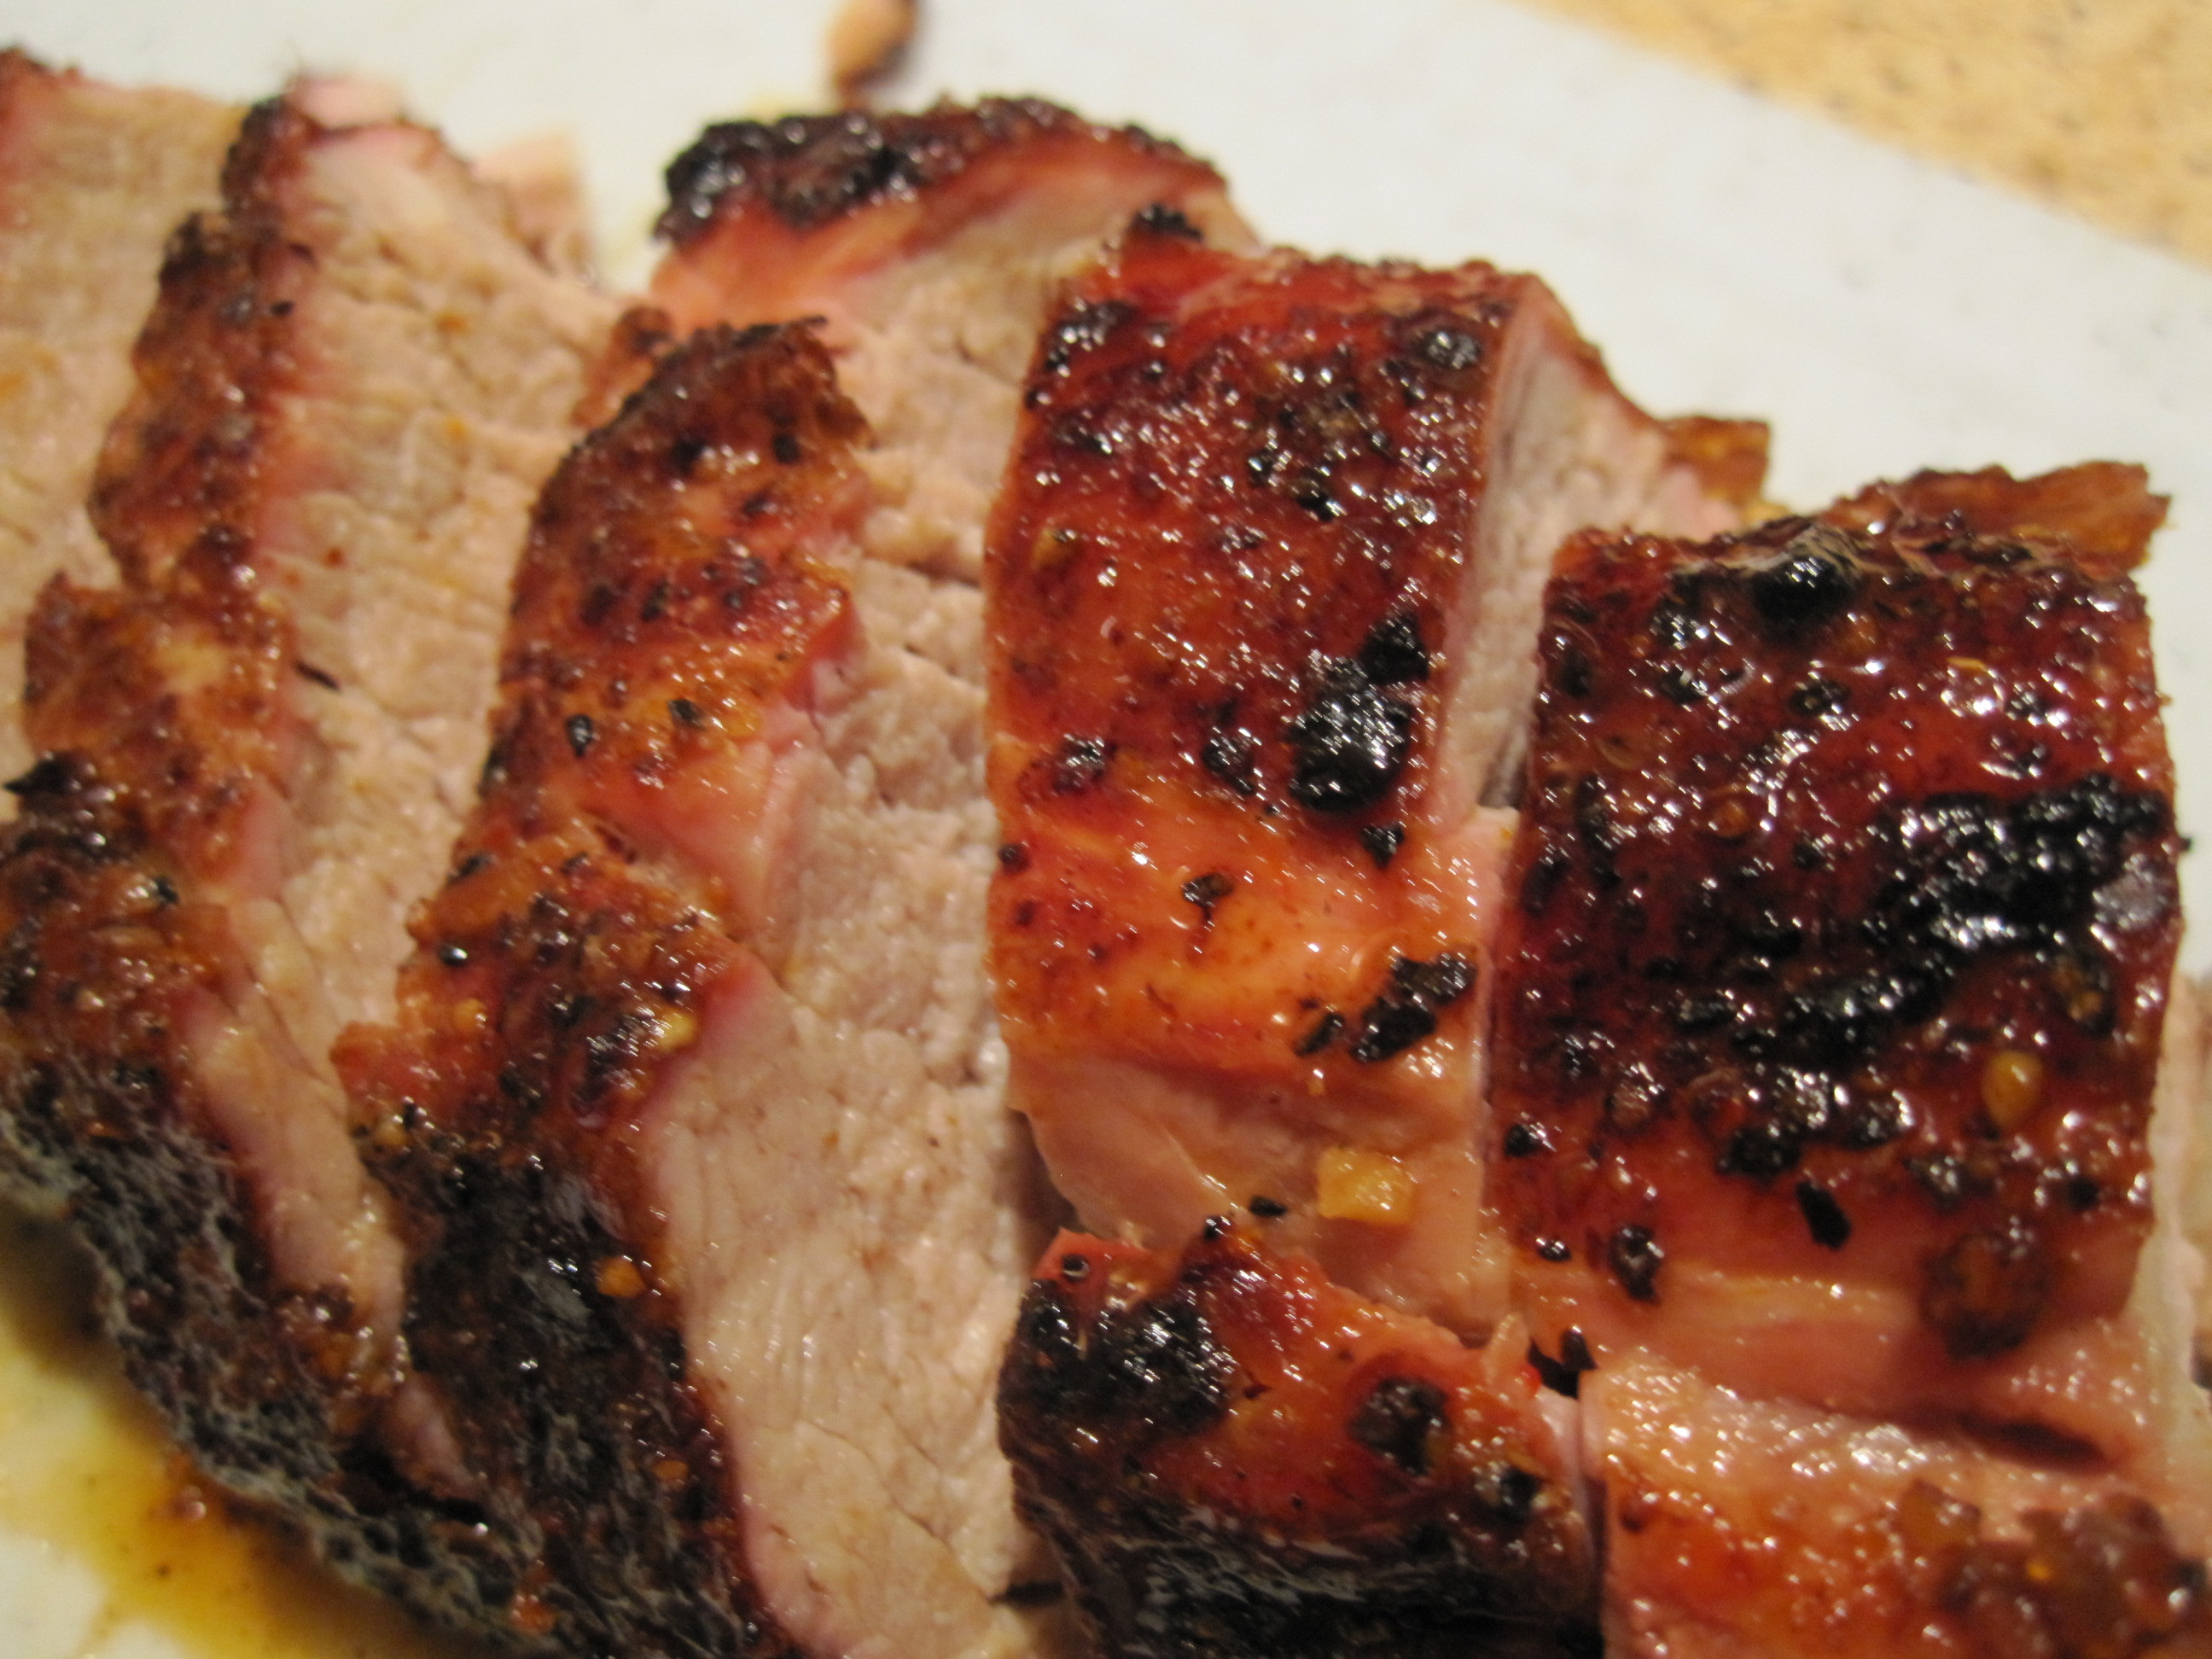 Pork Loin On The Grill
 Grilled pork tenderloin with red pepper jelly glaze